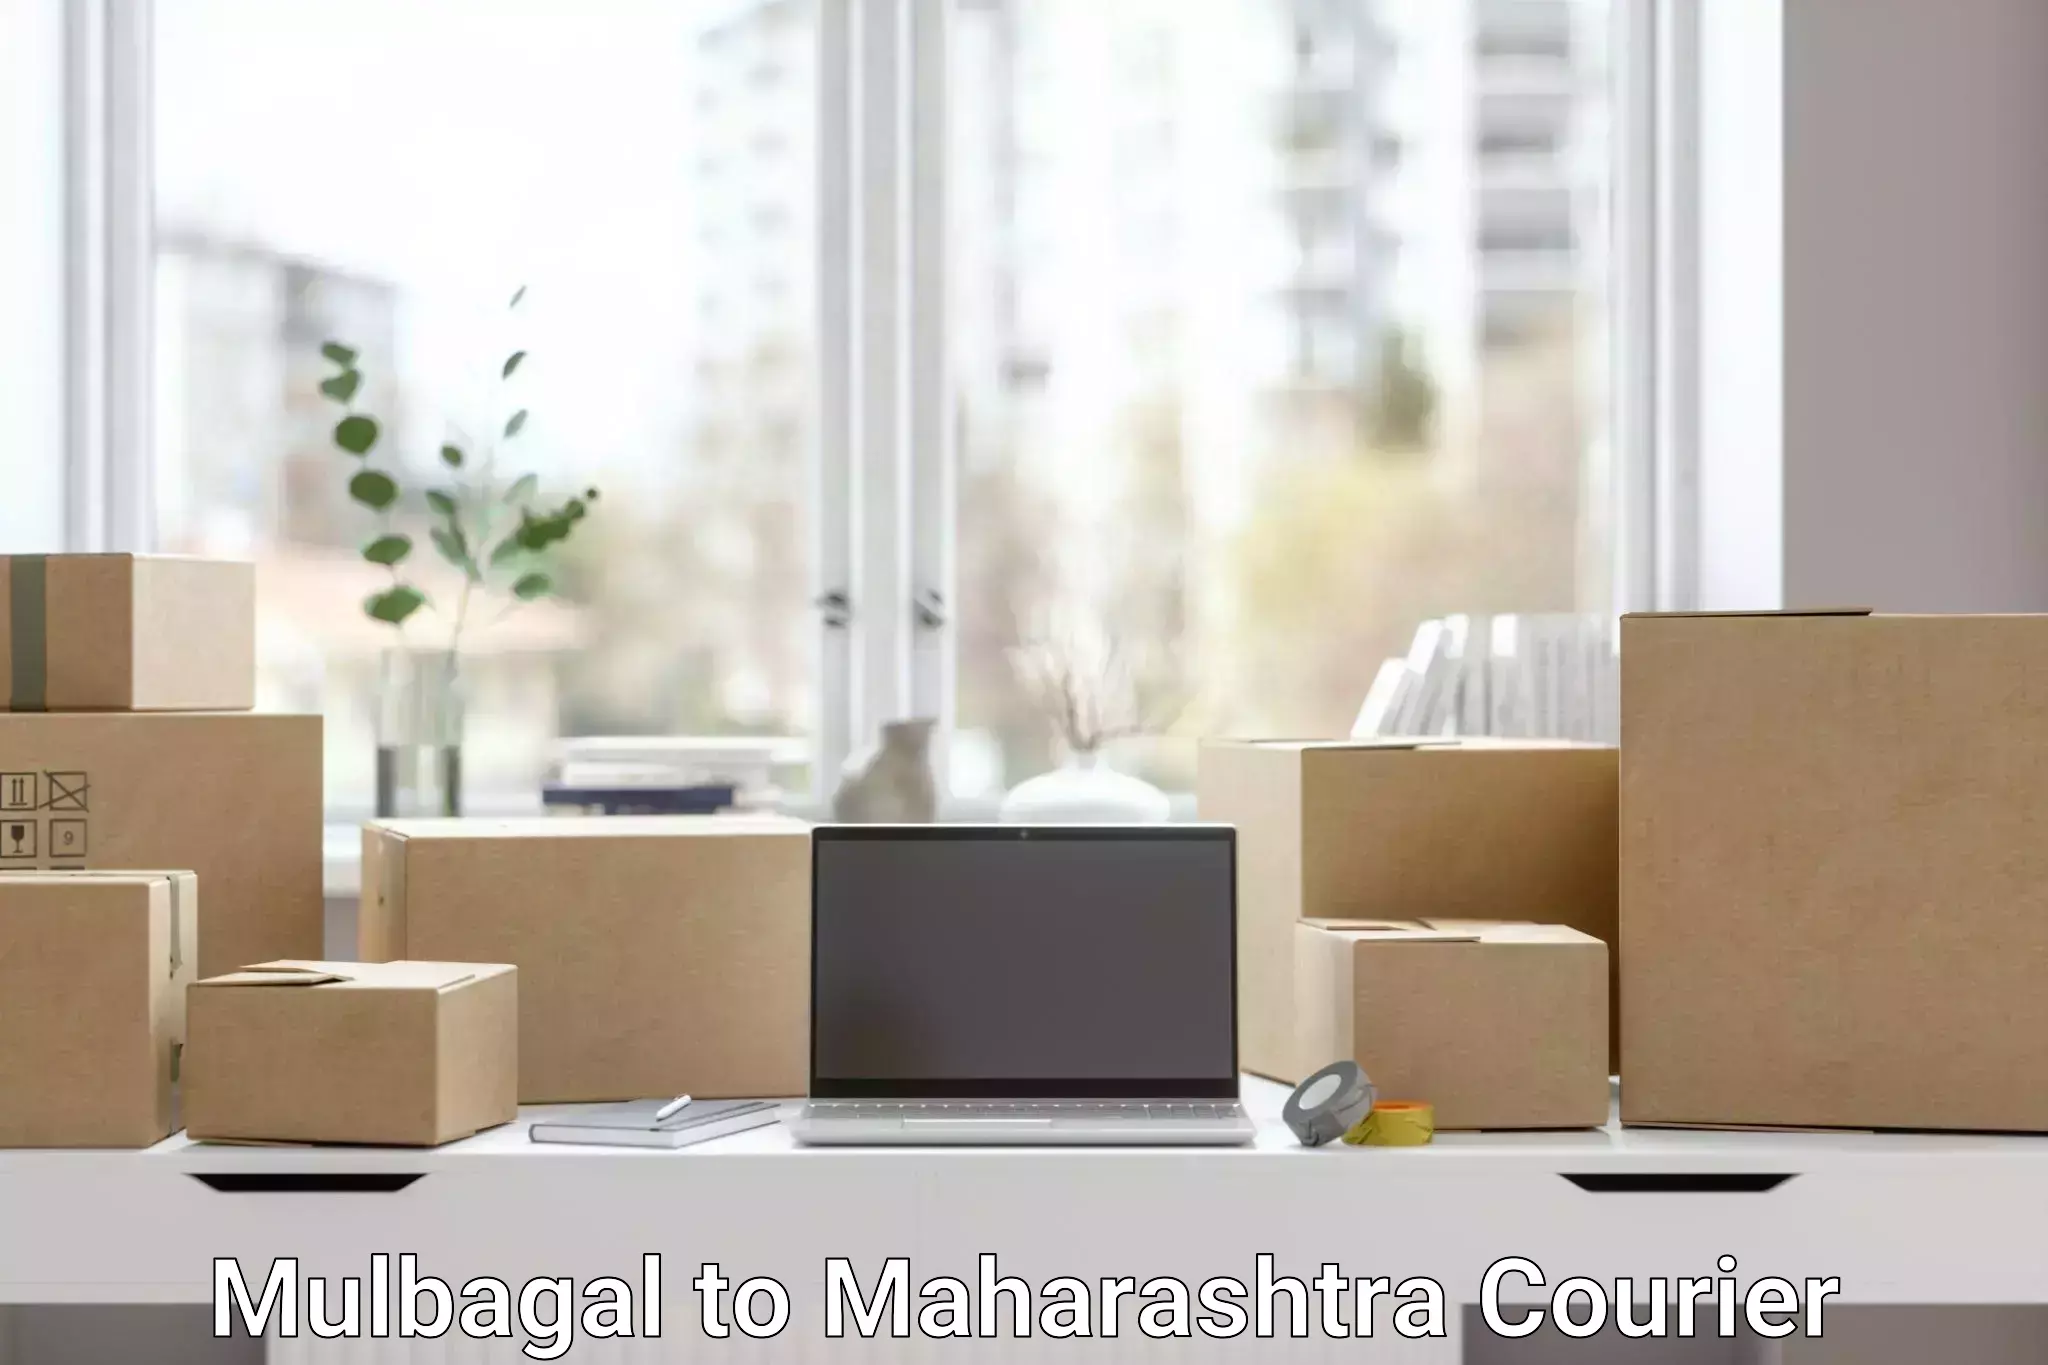 Comprehensive freight services Mulbagal to Maharashtra